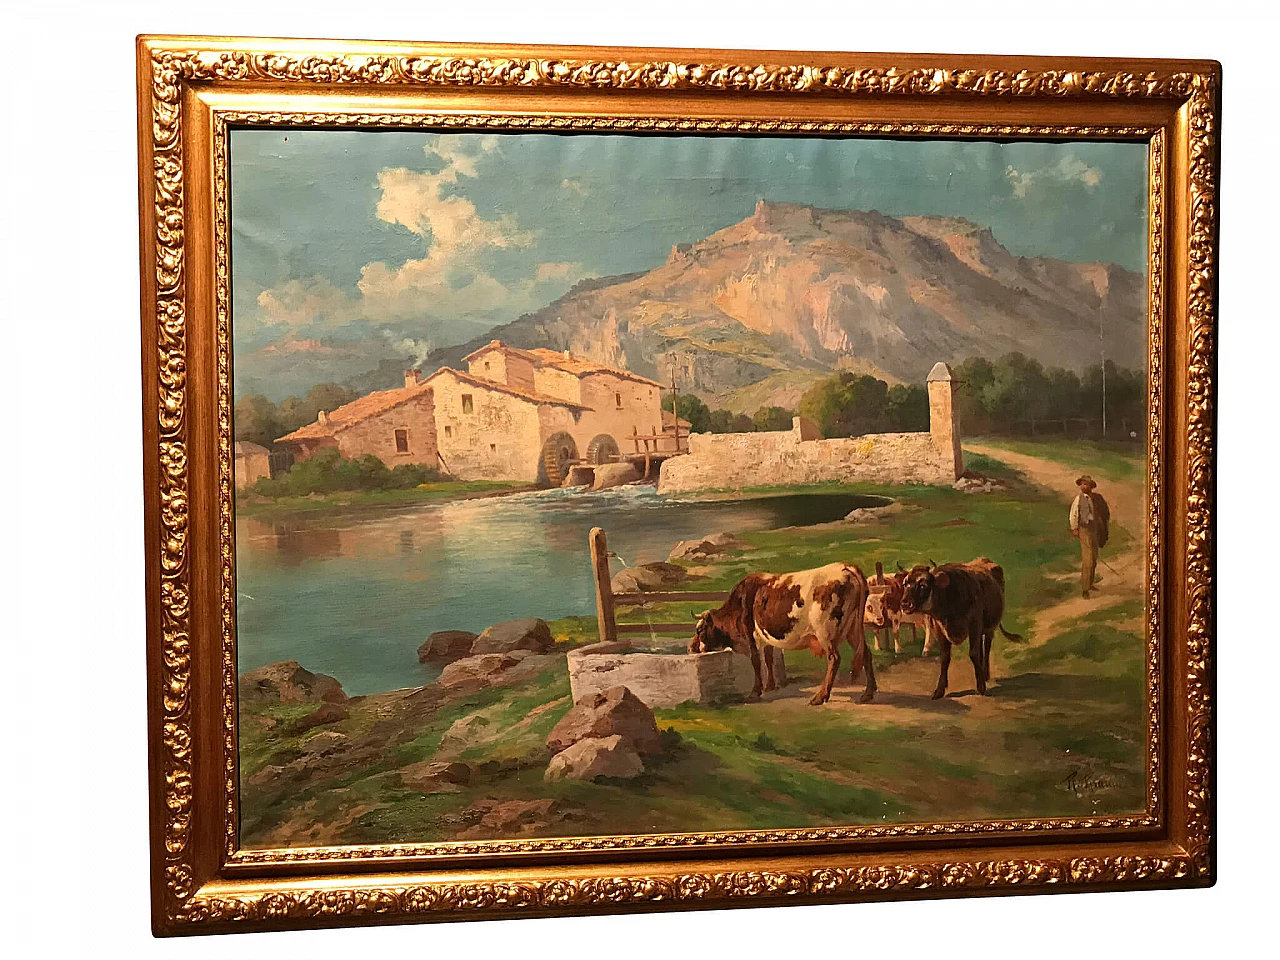 Neapolitan school painting oil on canvas signed R. Rianni, 19th century 1176593